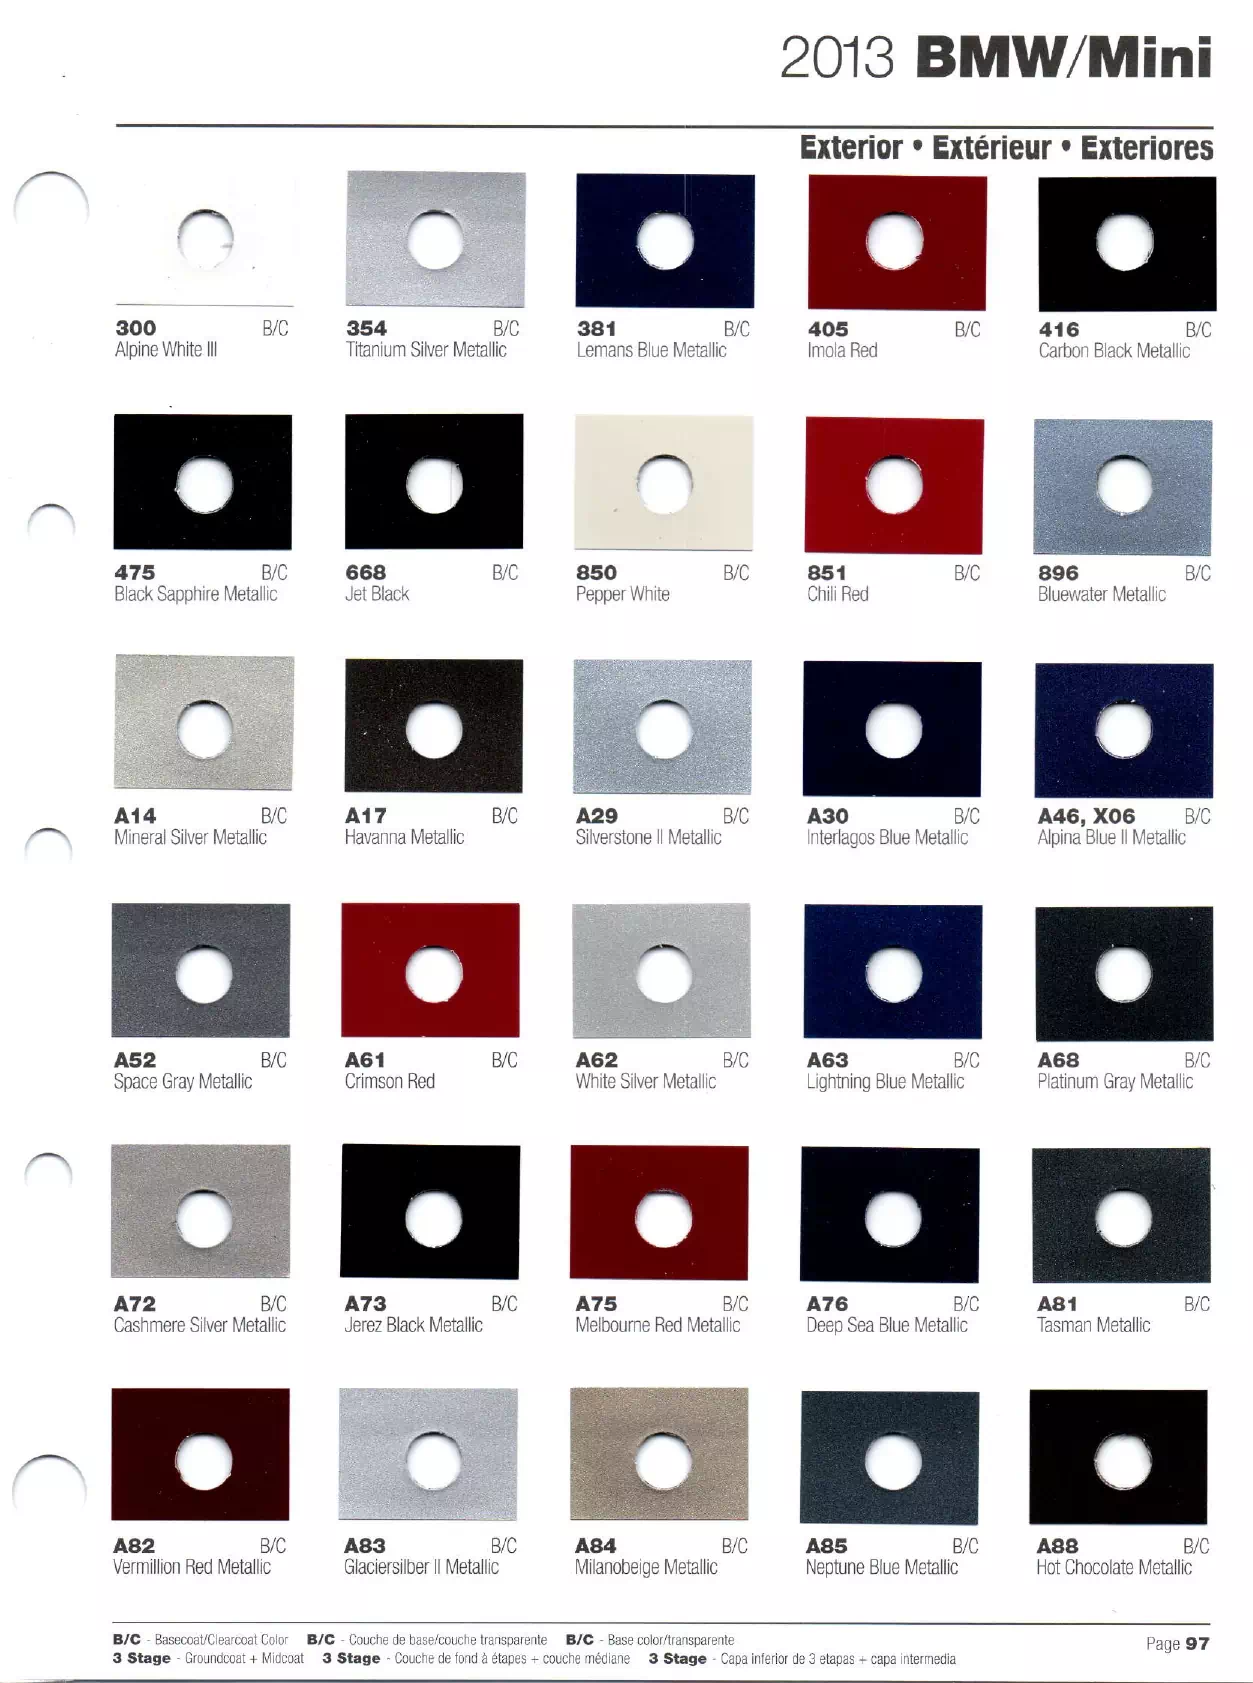 Paint swatches, paint codes, names for 2013 BMW Automobile